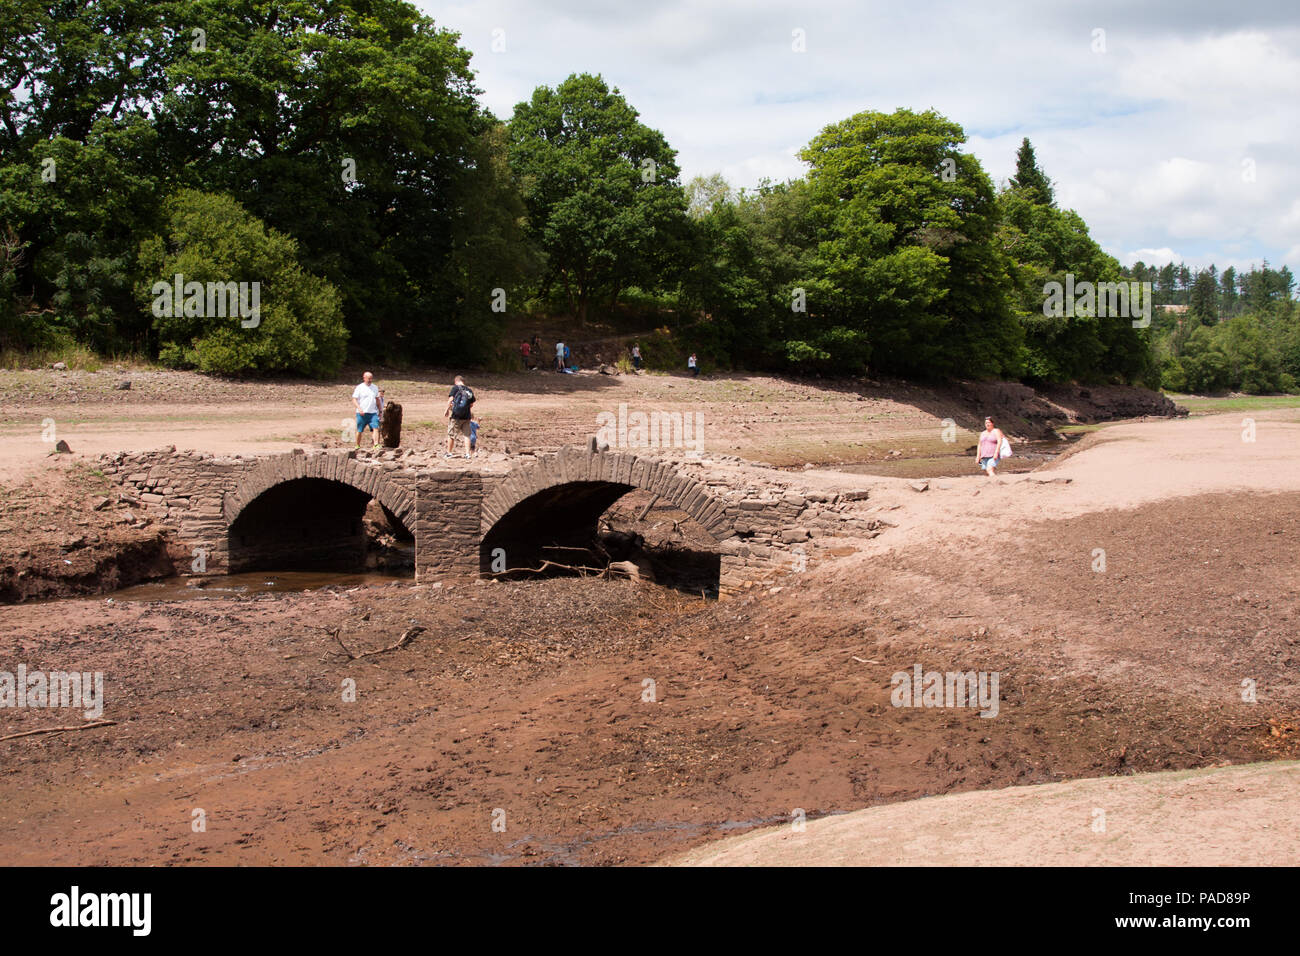 Llwyn Onn reservoir, Merthyr Tydfil, South Wales,  UK.  22 July 2018.  UK weather: The heatwave has caused this reservoir to become severely depleted, with the water line well below normal.  A stream that runs into the reservoir has dried up.  Pont Yr Daf bridge, an old bridge in use before the reservoir's construction, now usually underwater, has been uncovered.  Credit: Andrew Bartlett/Alamy Live News Stock Photo